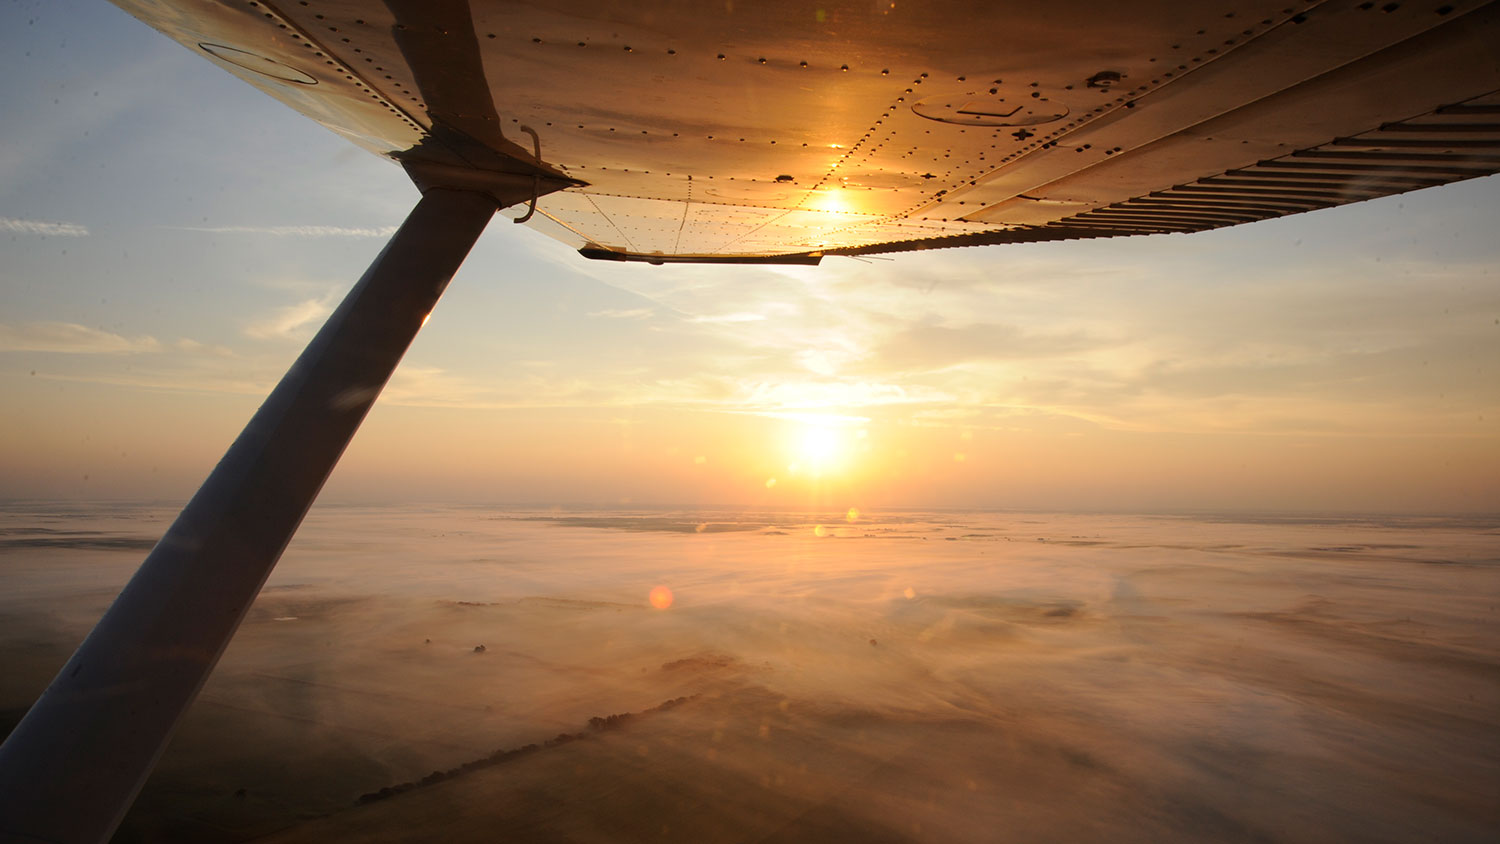 View of sunrise from plane